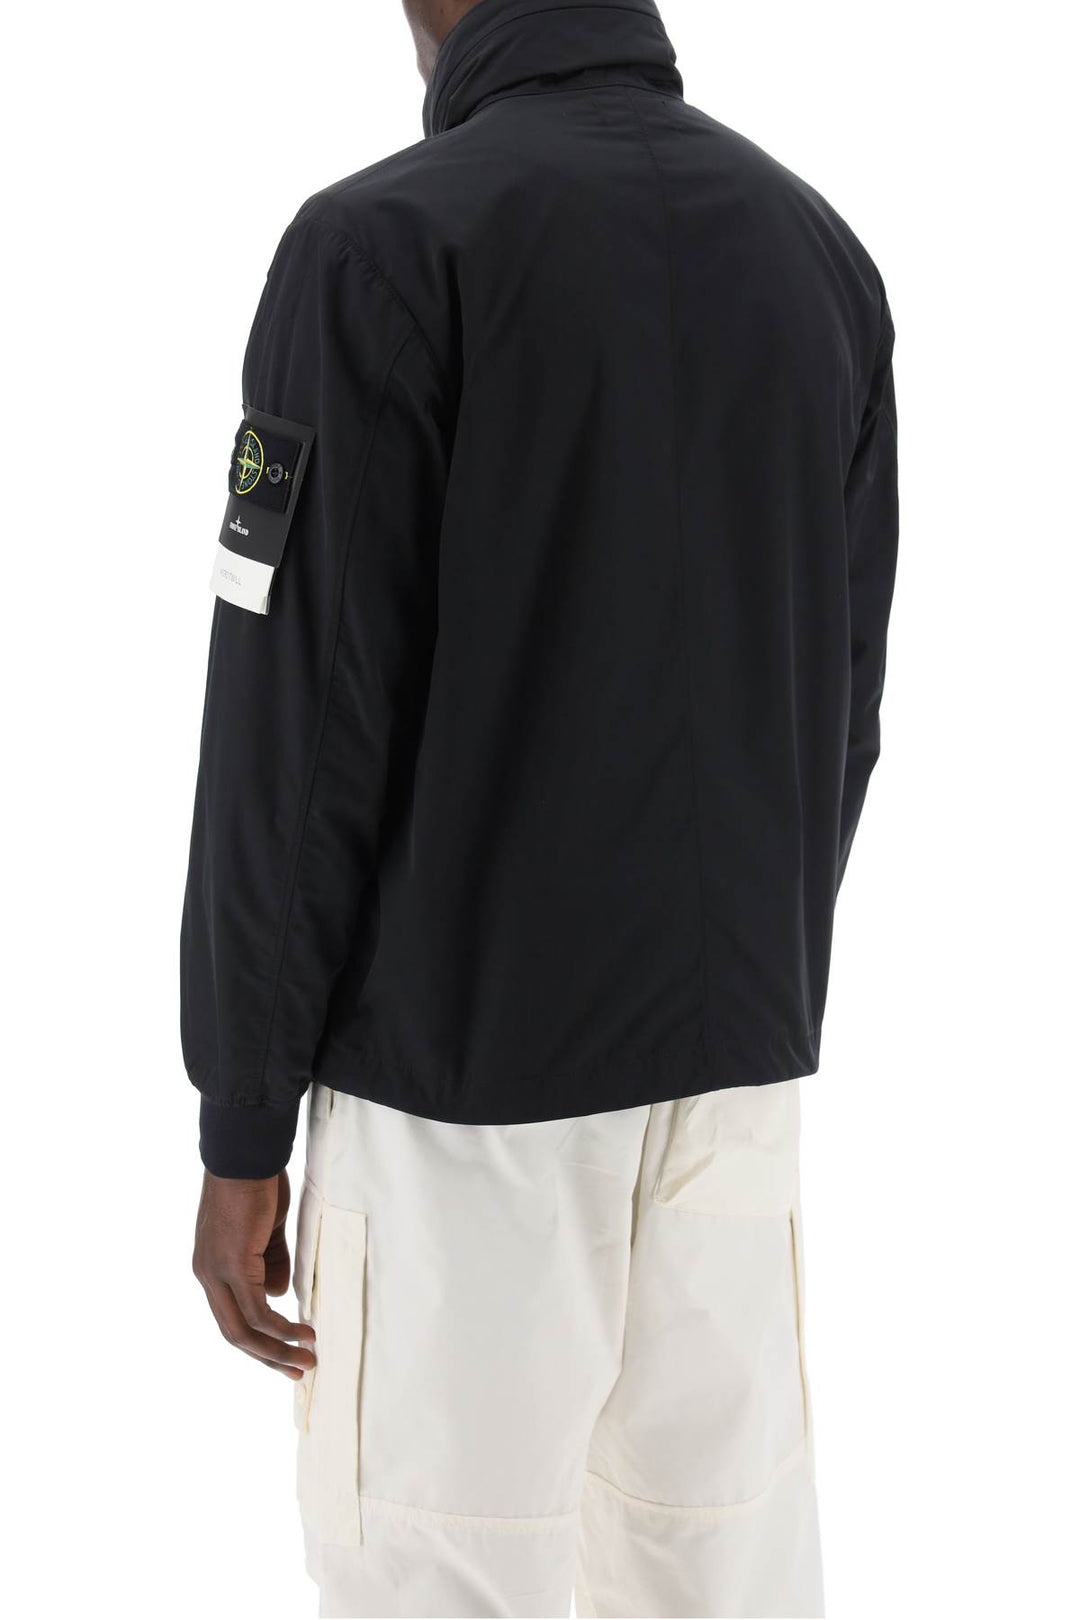 Stone Island Micro Twill Jacket With Extractable Hood   Black